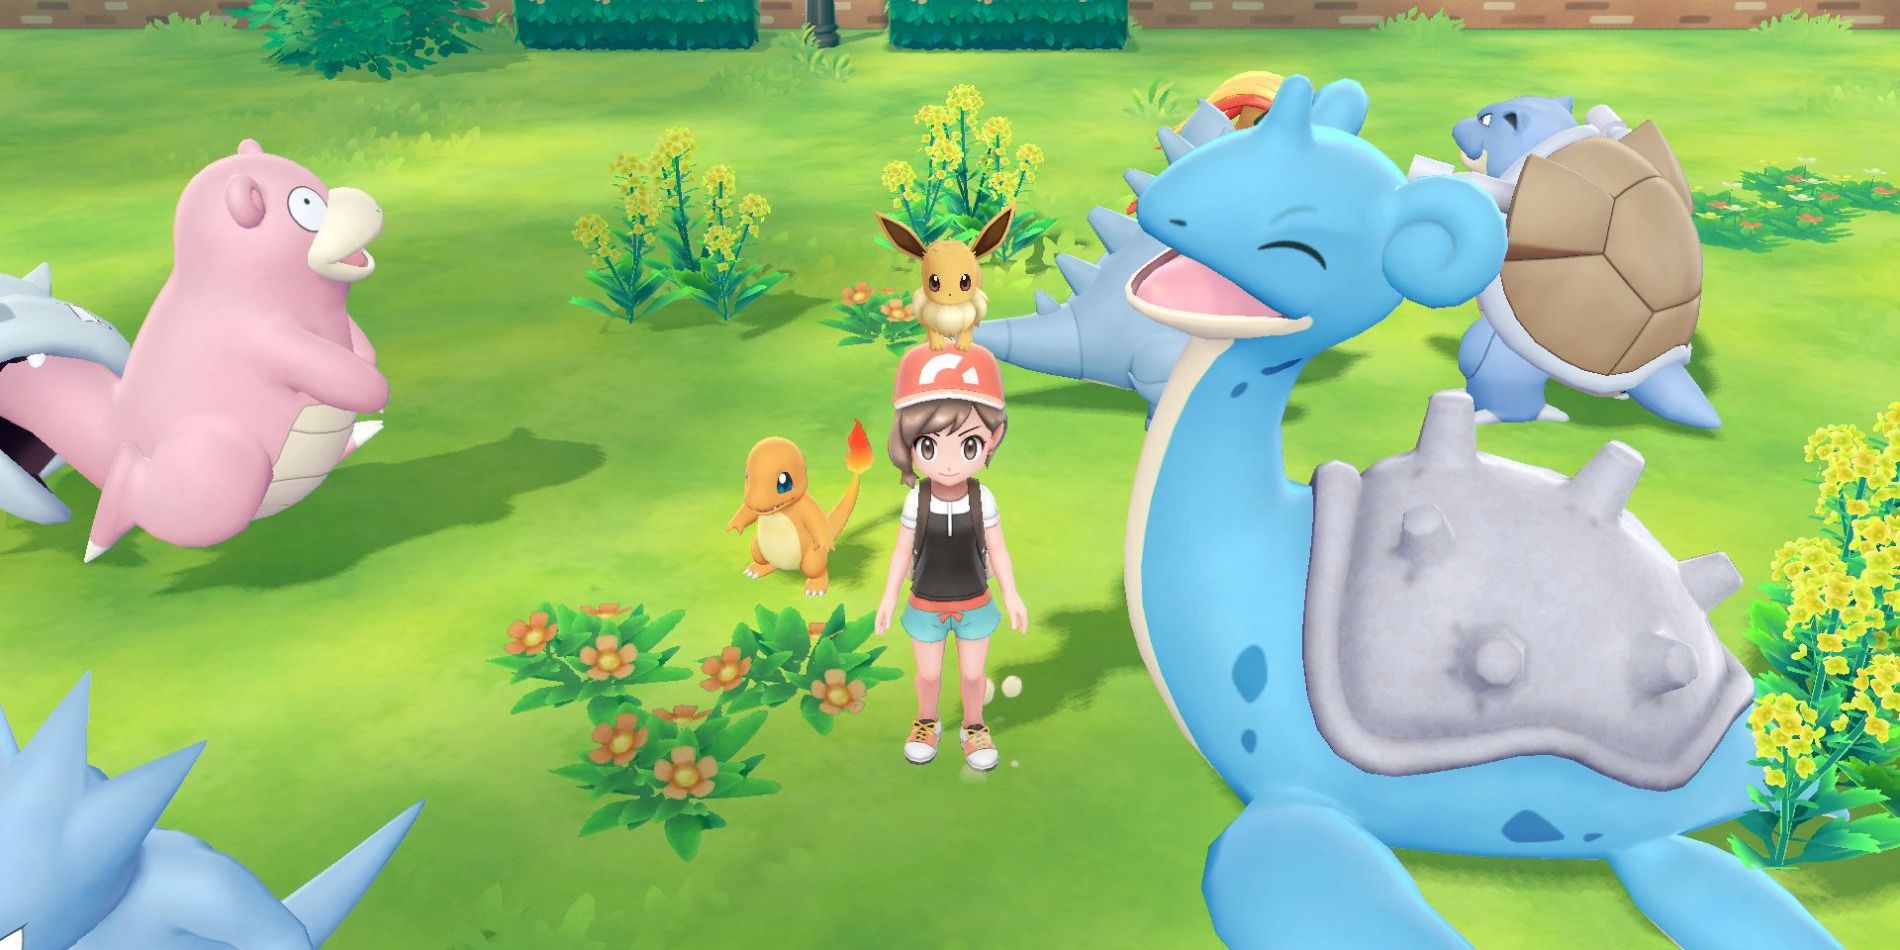 The player in Let's Go, Eevee! interacting with their Pokémon